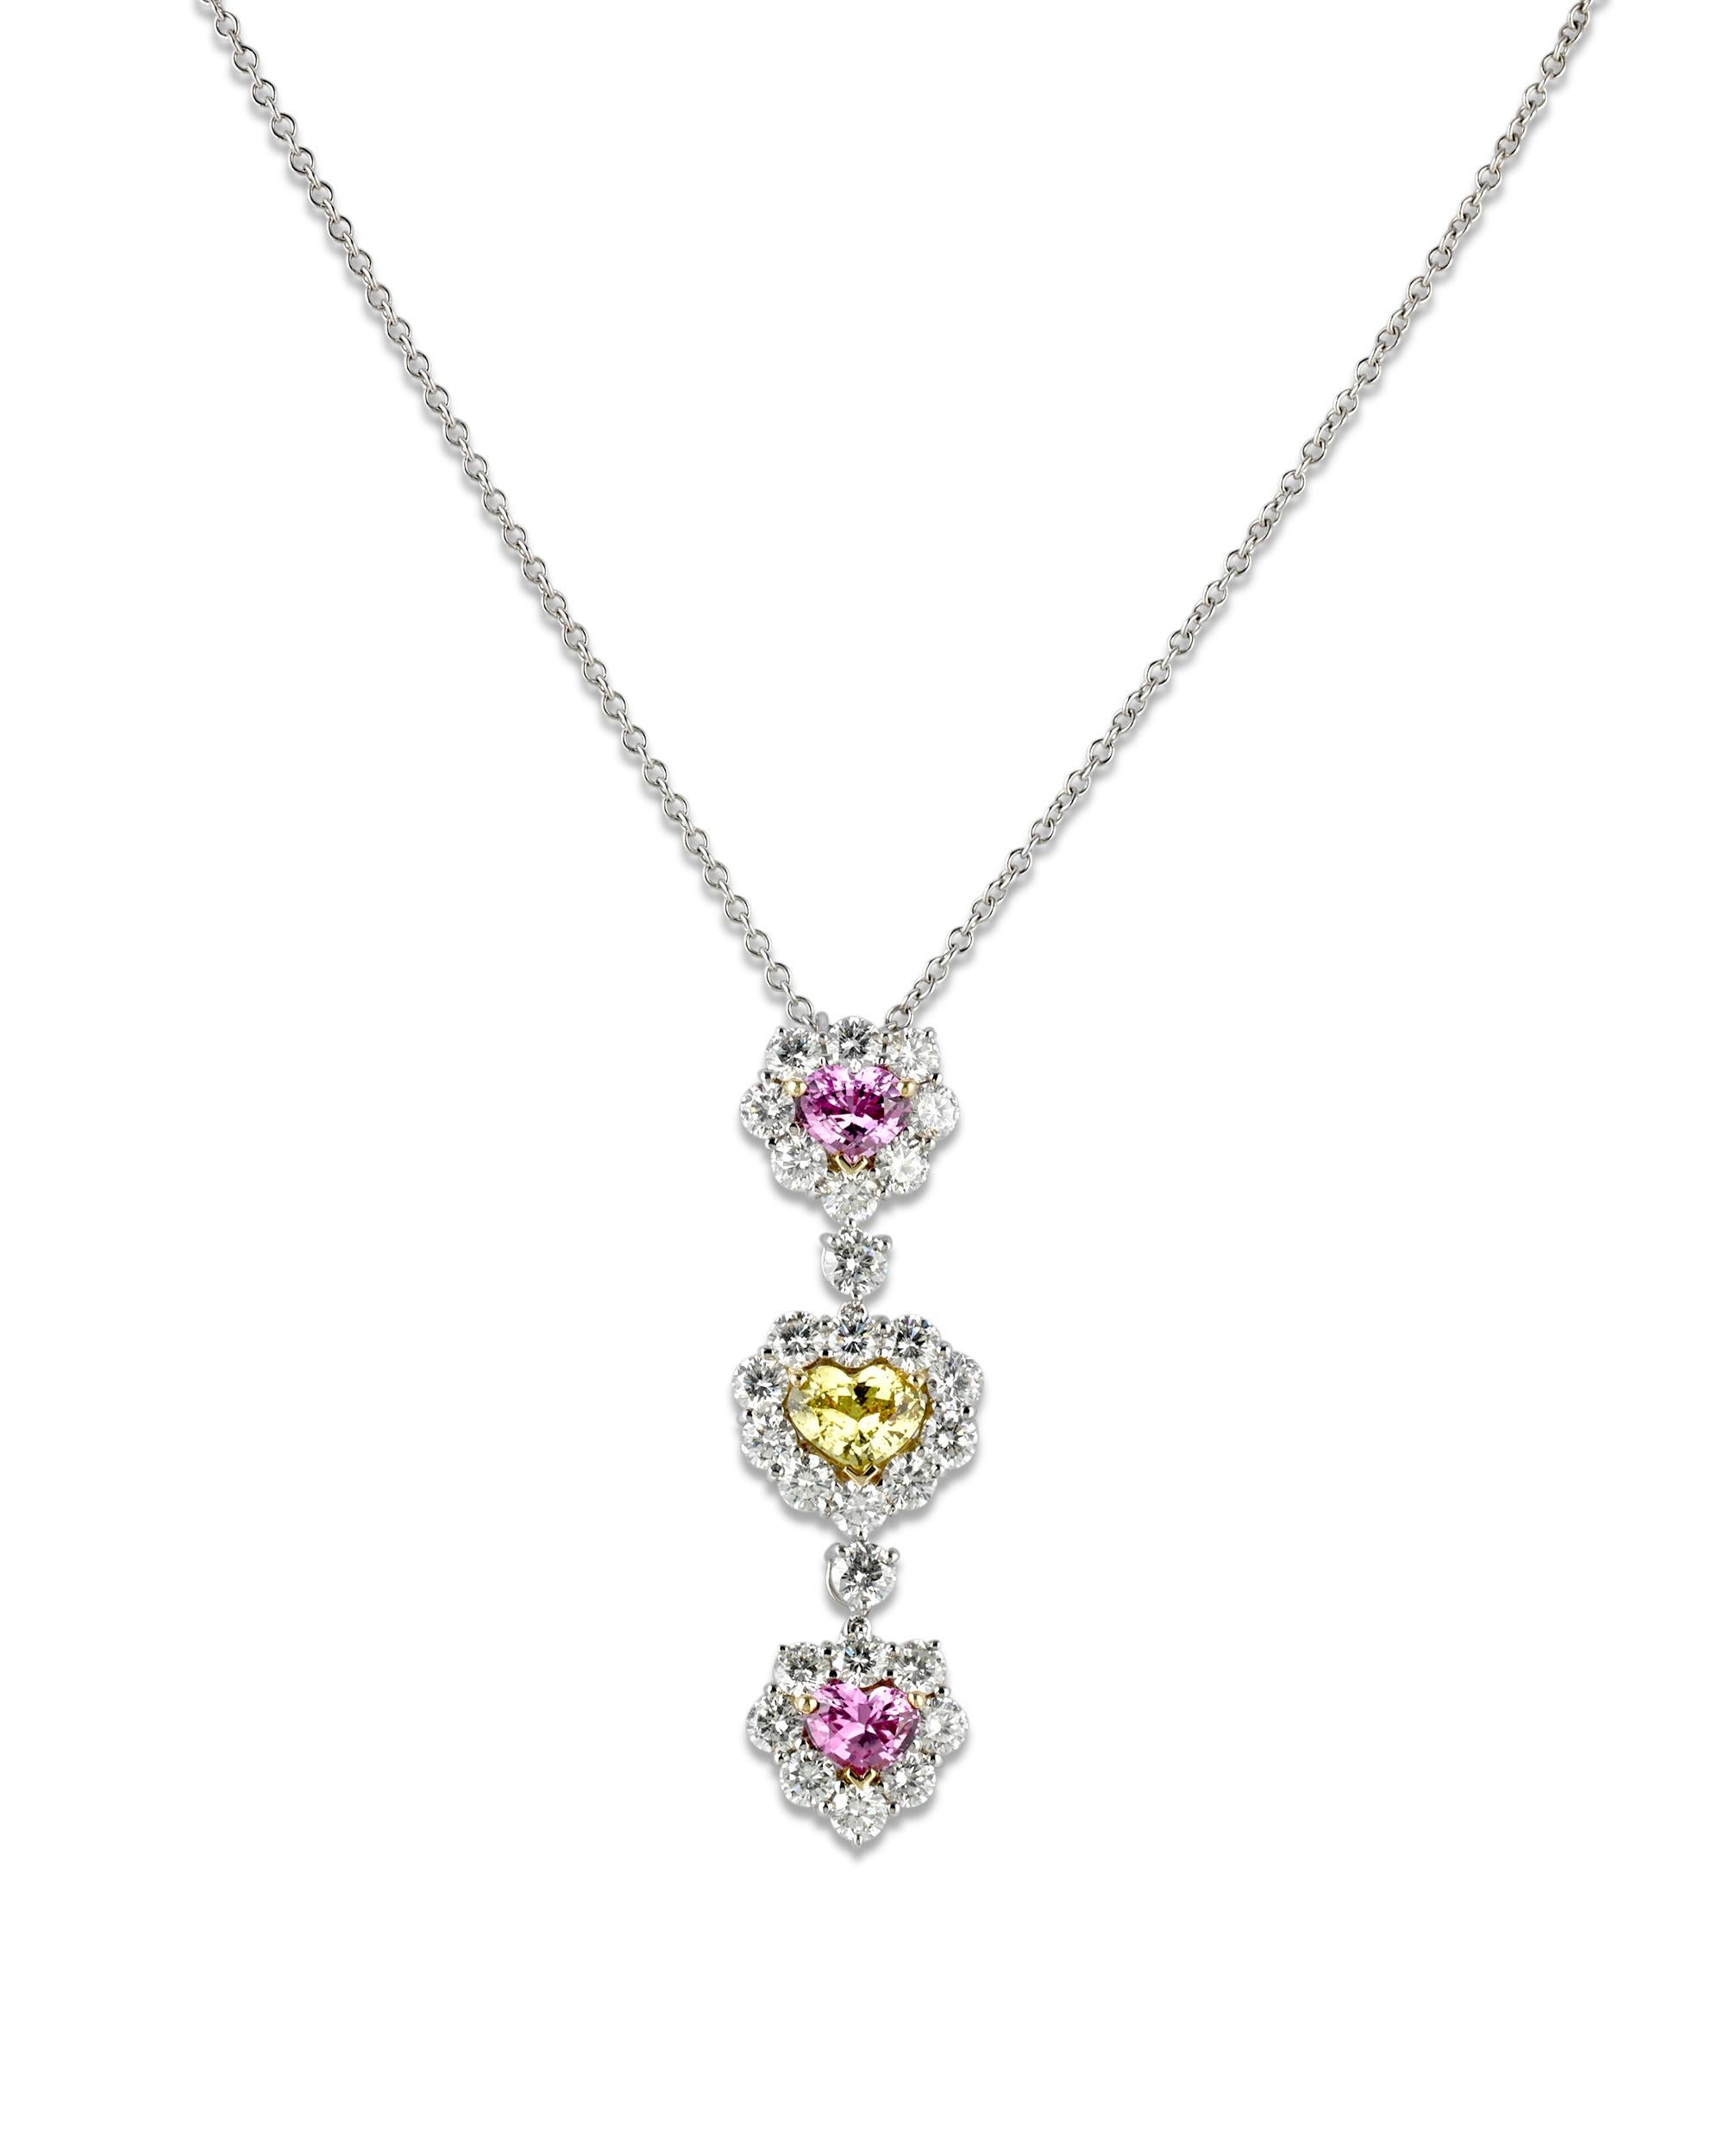 Heart Cut Heart-Shaped Colored Sapphire Necklace, 3.20 Carats